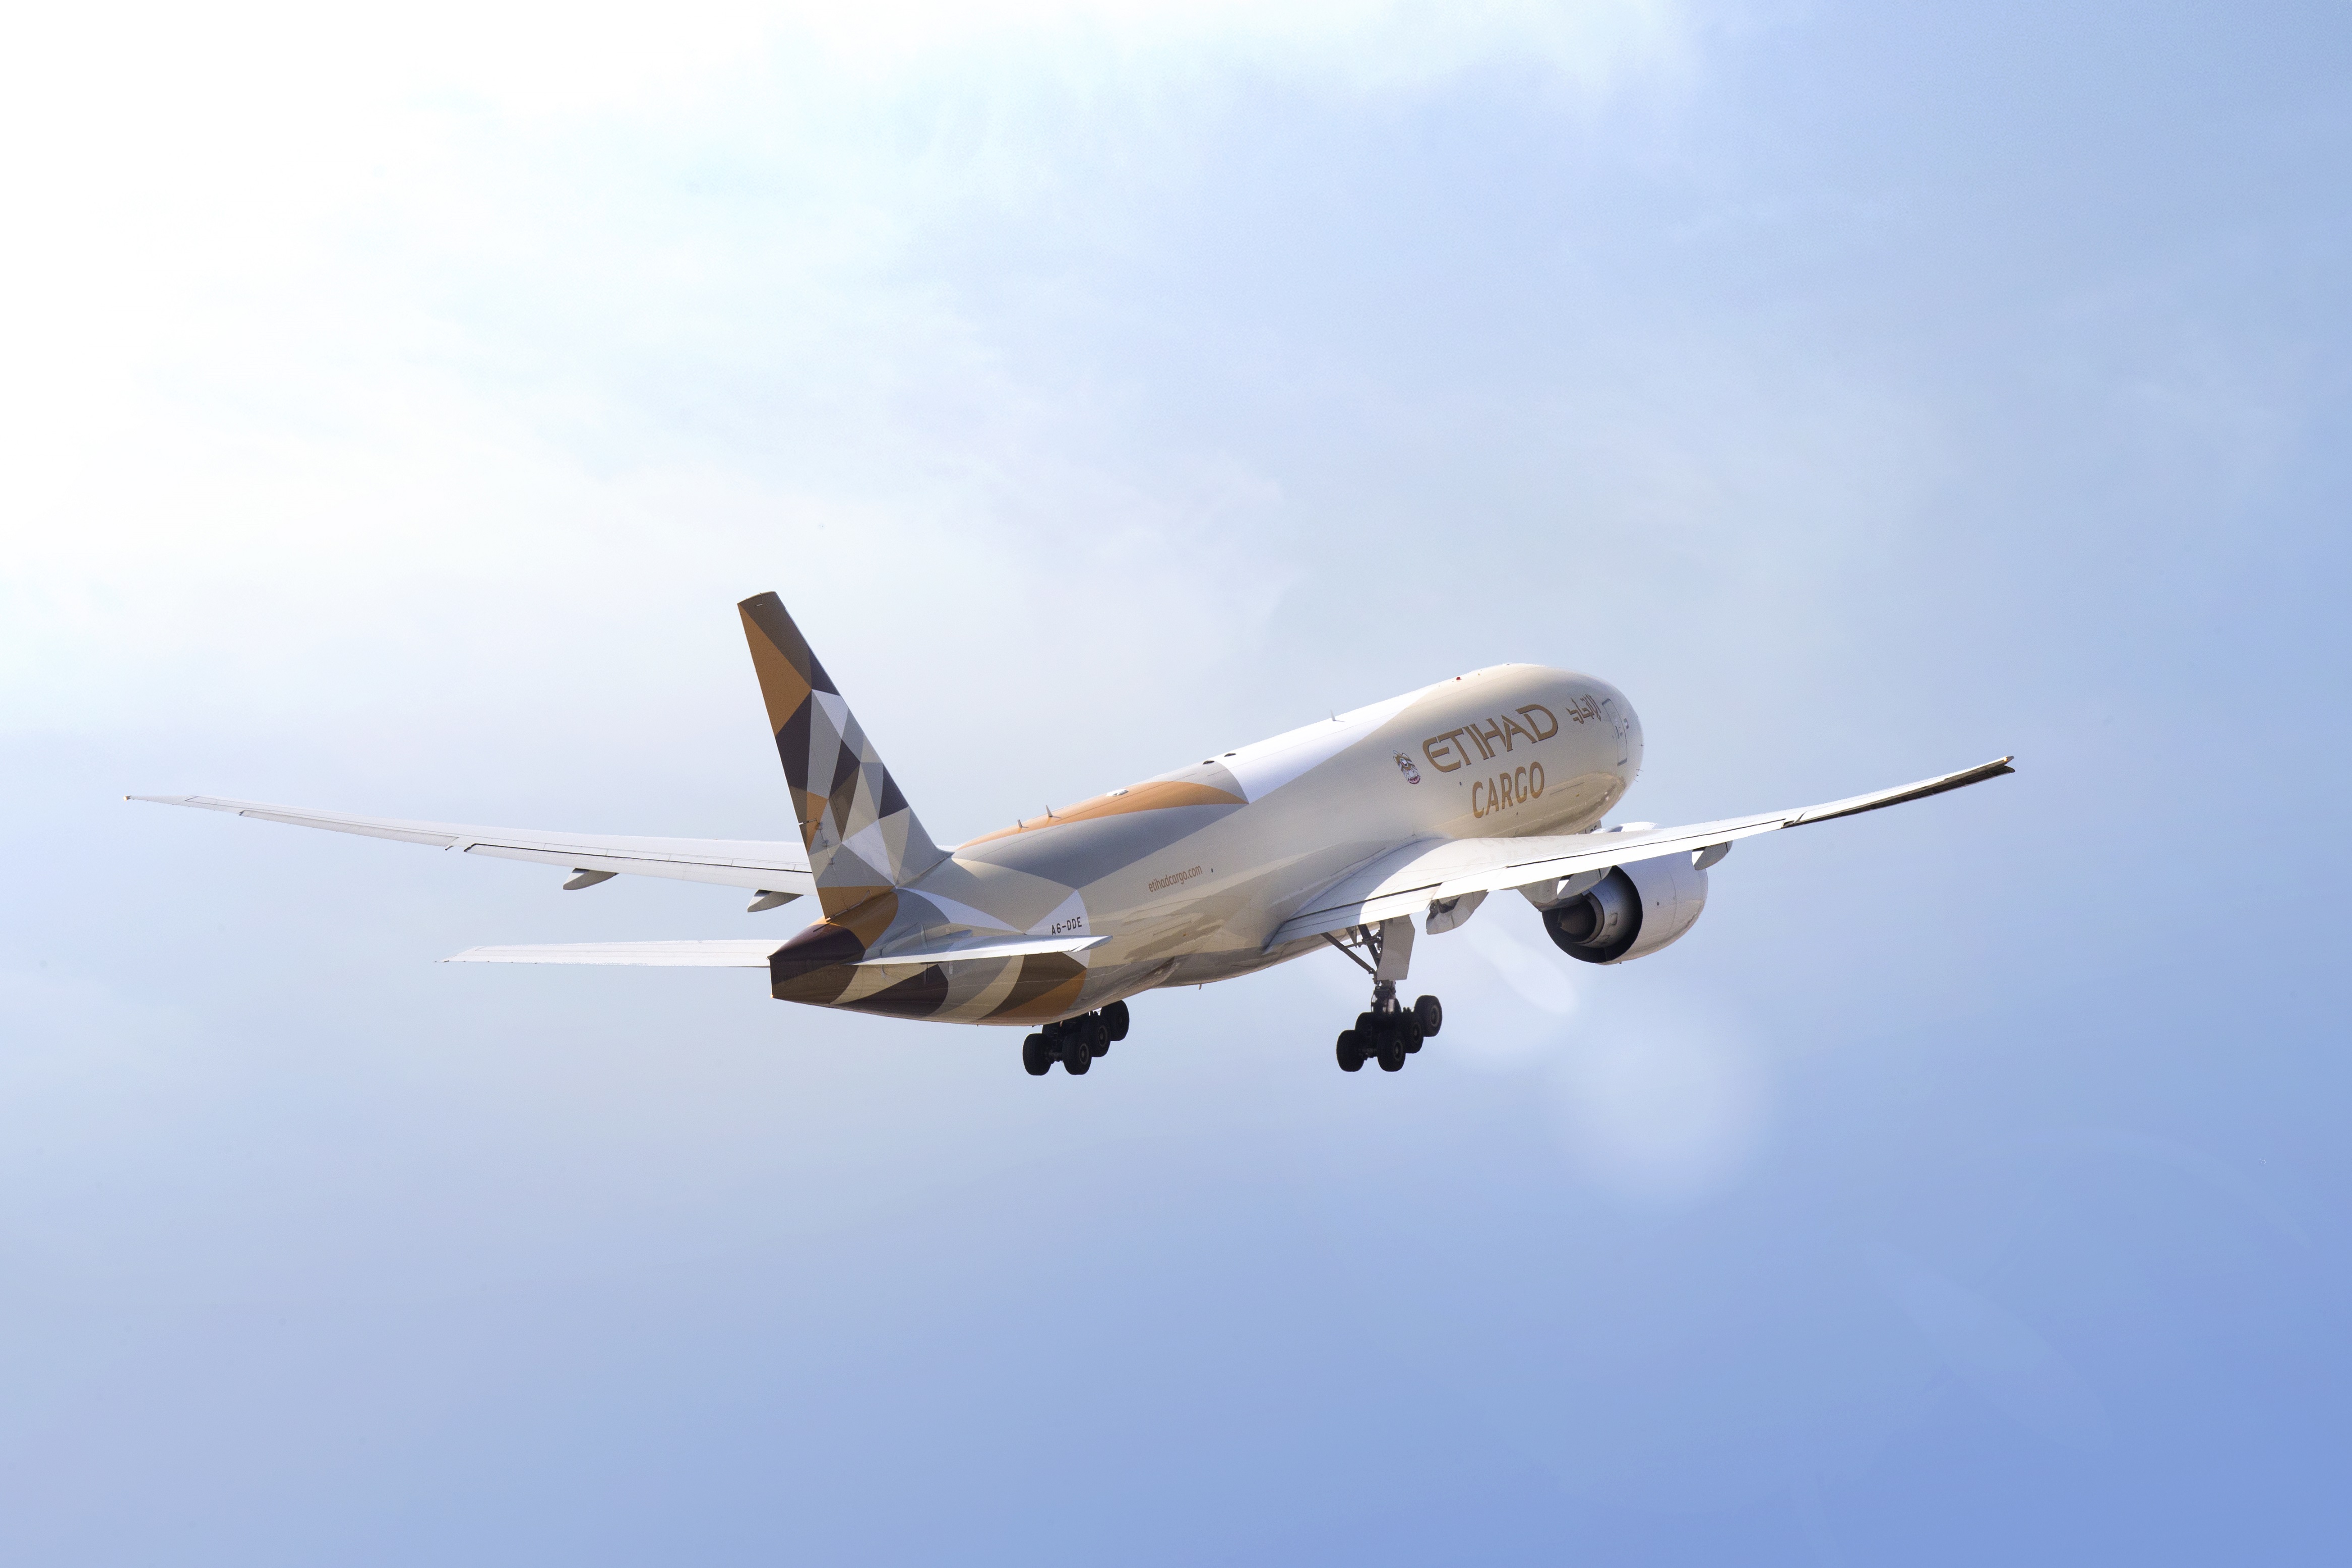 Abu Dhabi Airports And Etihad Cargo To Transform Abu Dhabi International Airport’s Cargo And Logistics Infrastructure